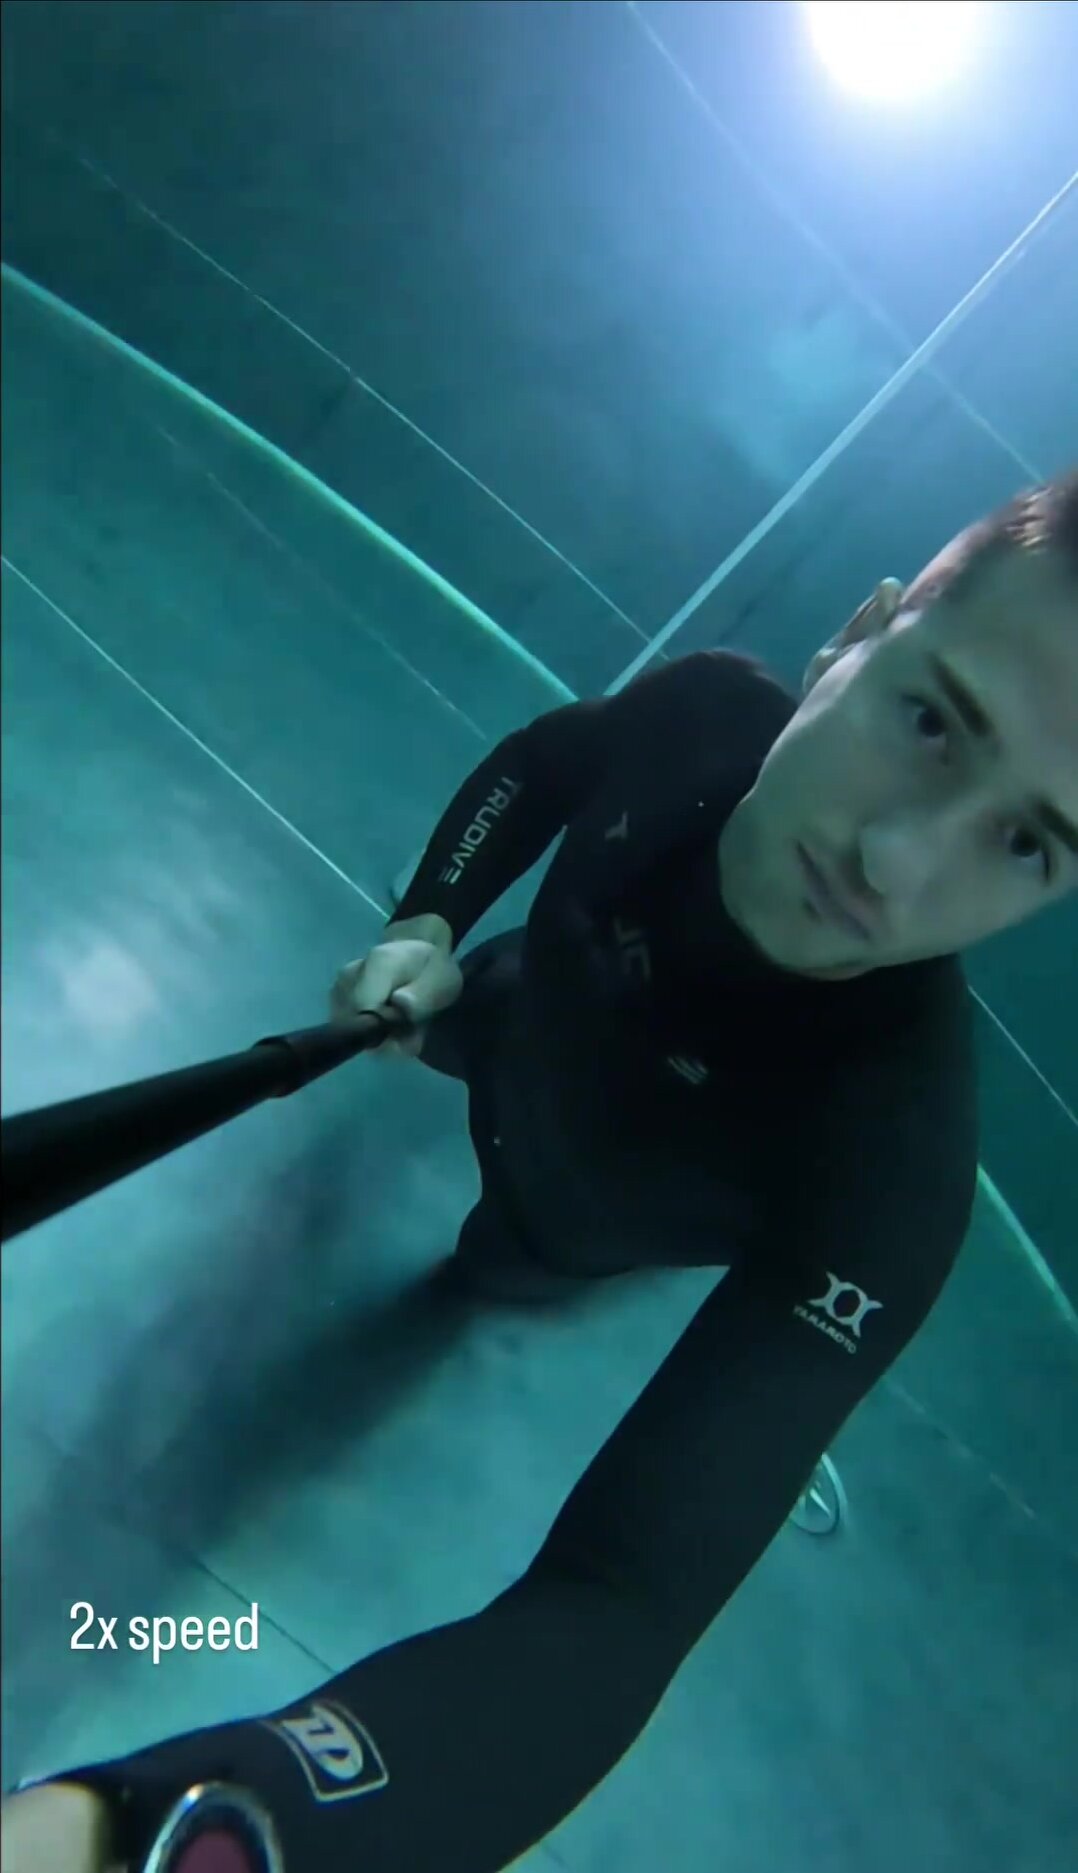 Deep dive underwater, barefaced wearing tight wetsuit